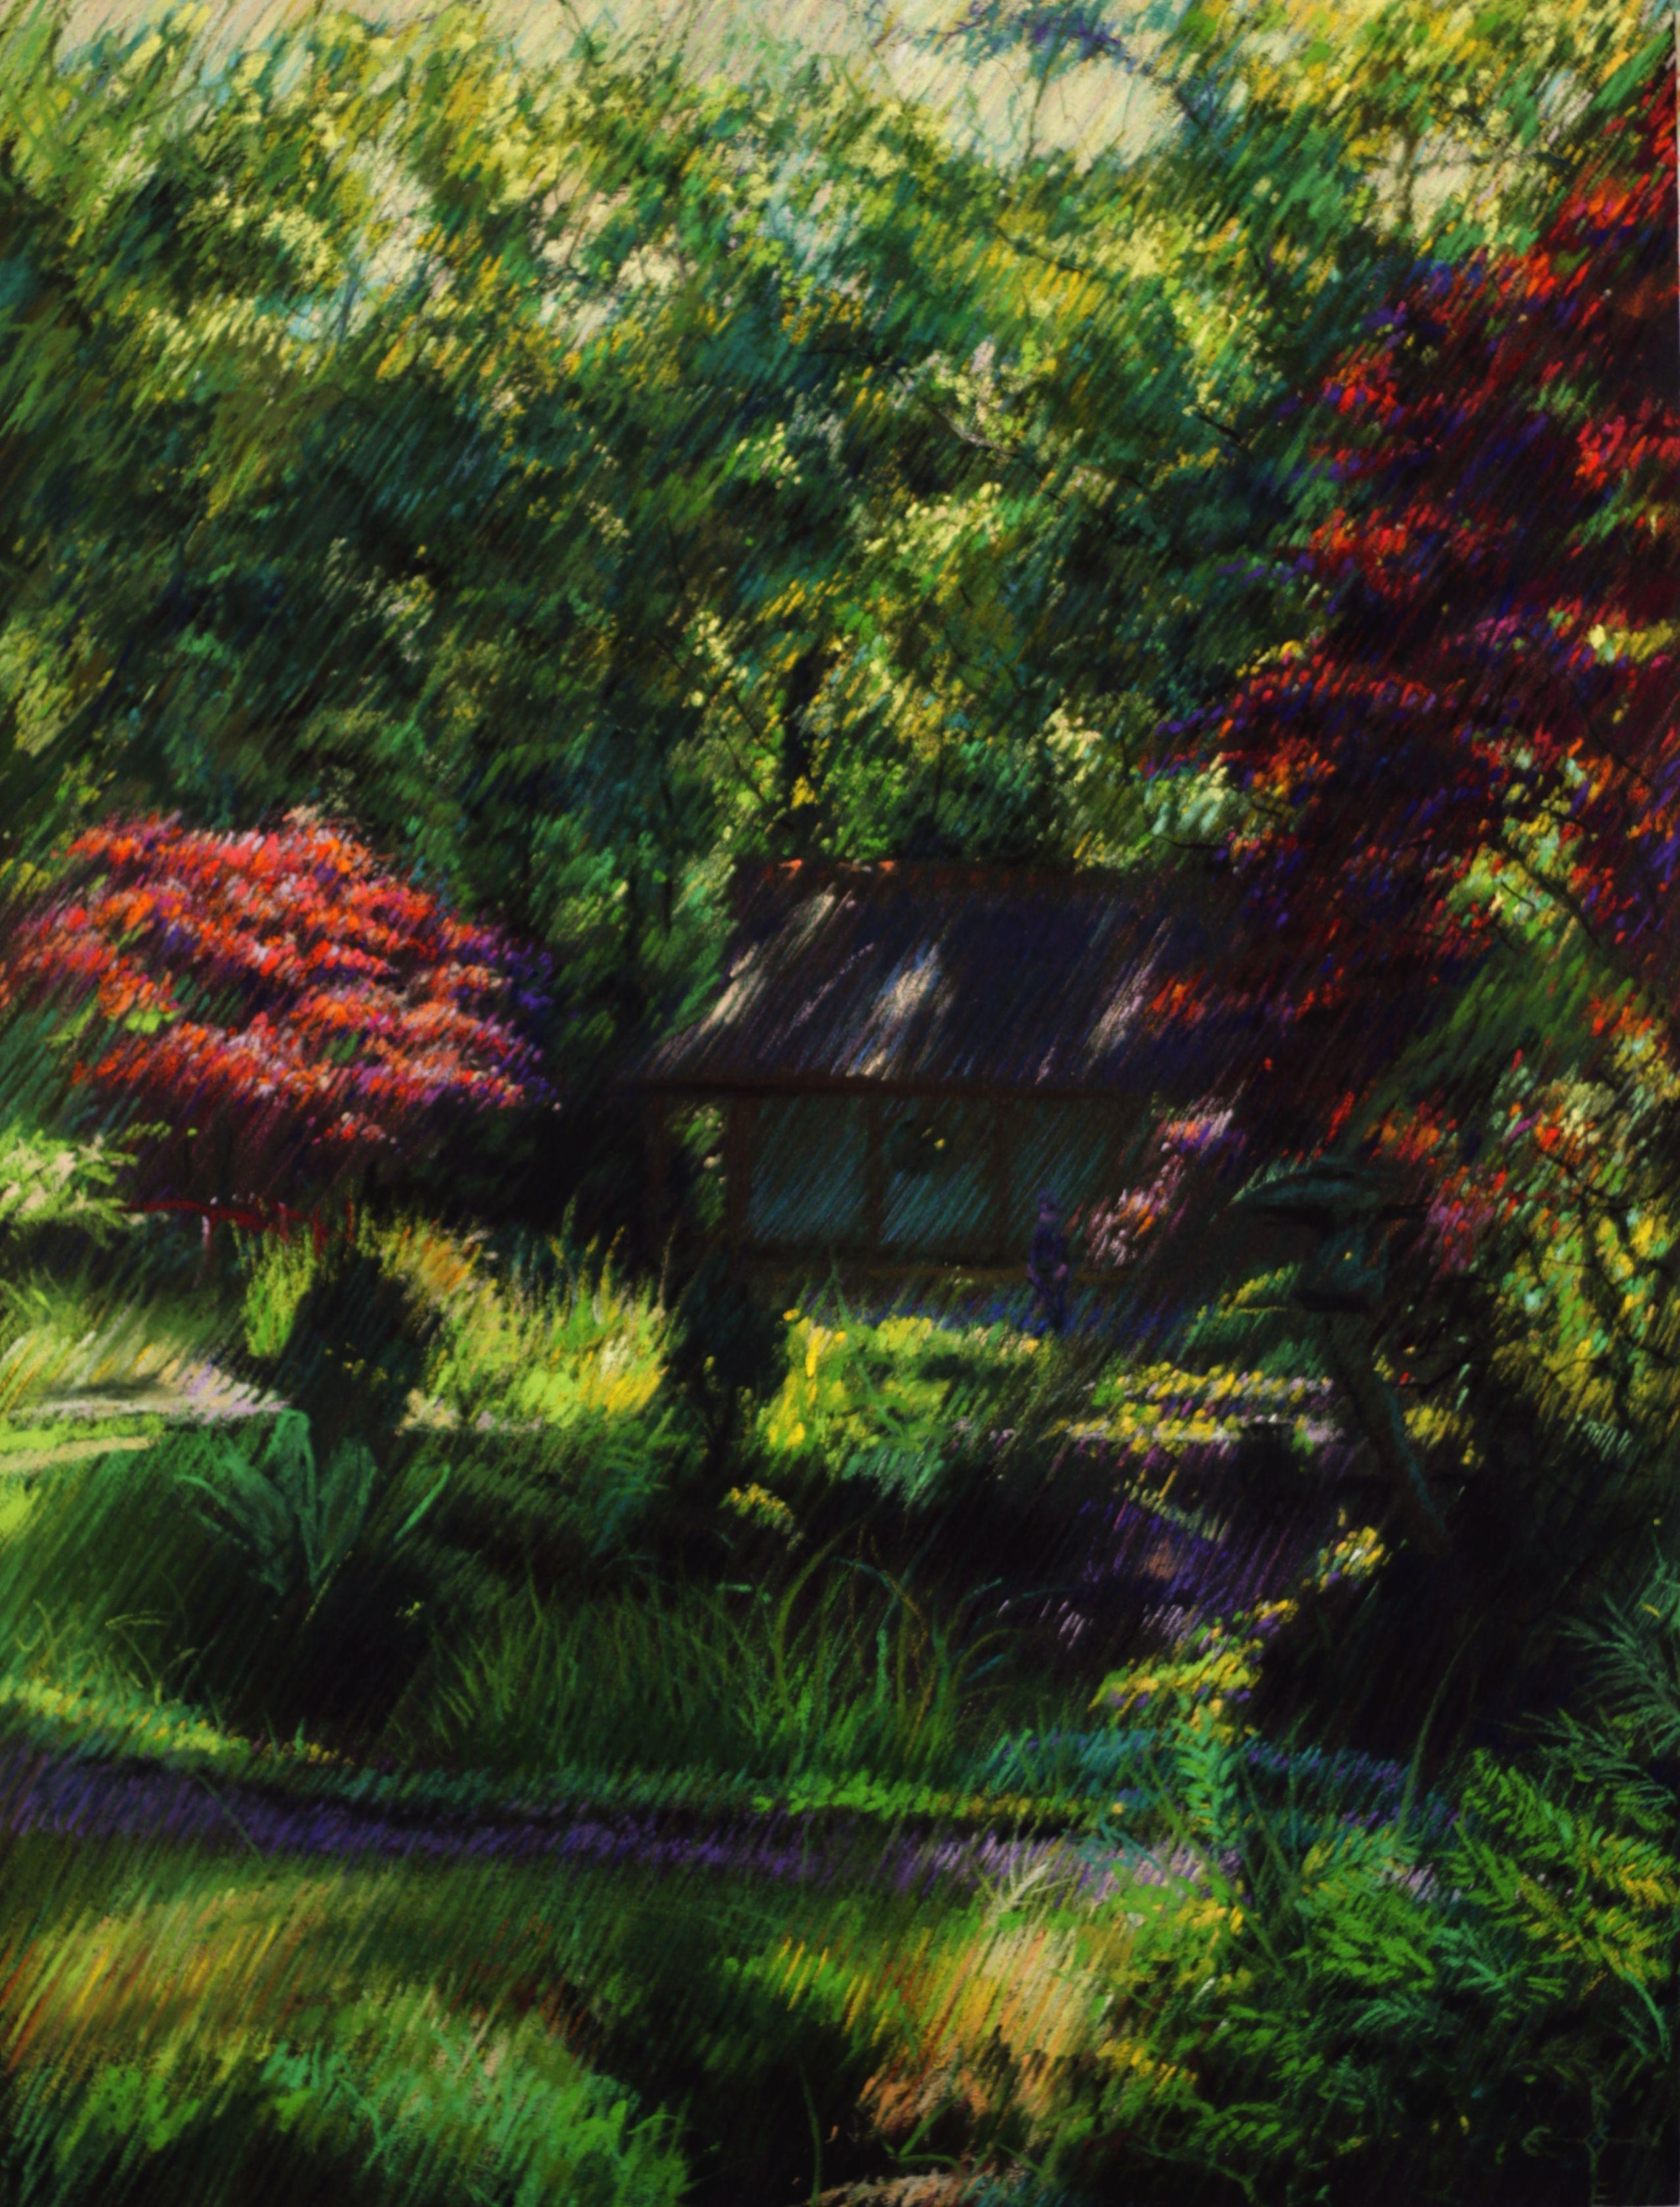 The Japanese garden 2 (2014), Drawing, Pastels on Other - Art by Corne Akkers